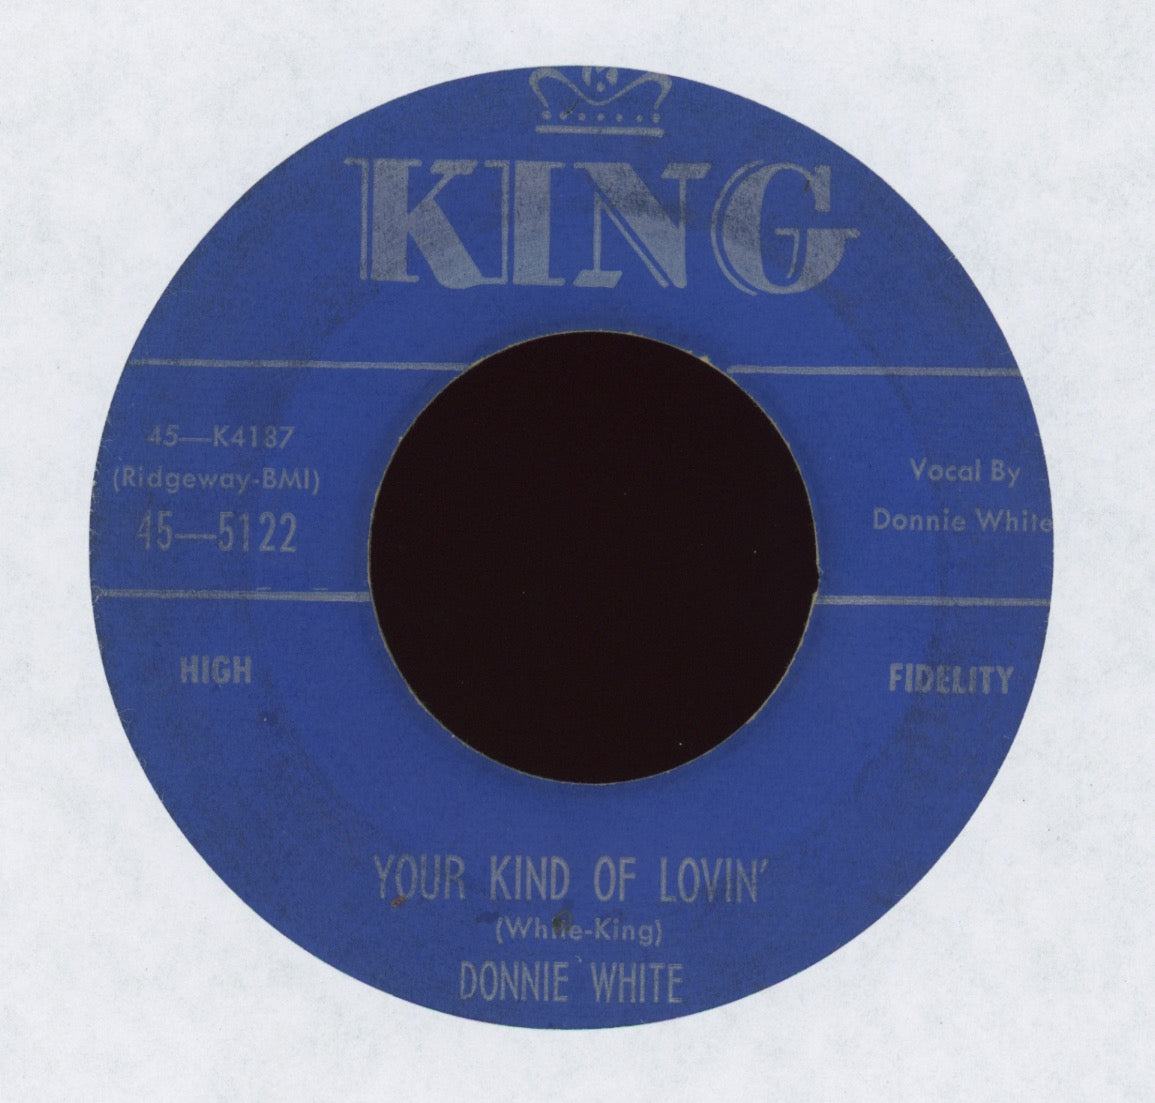 Donnie White - Your Kind Of Lovin' on King